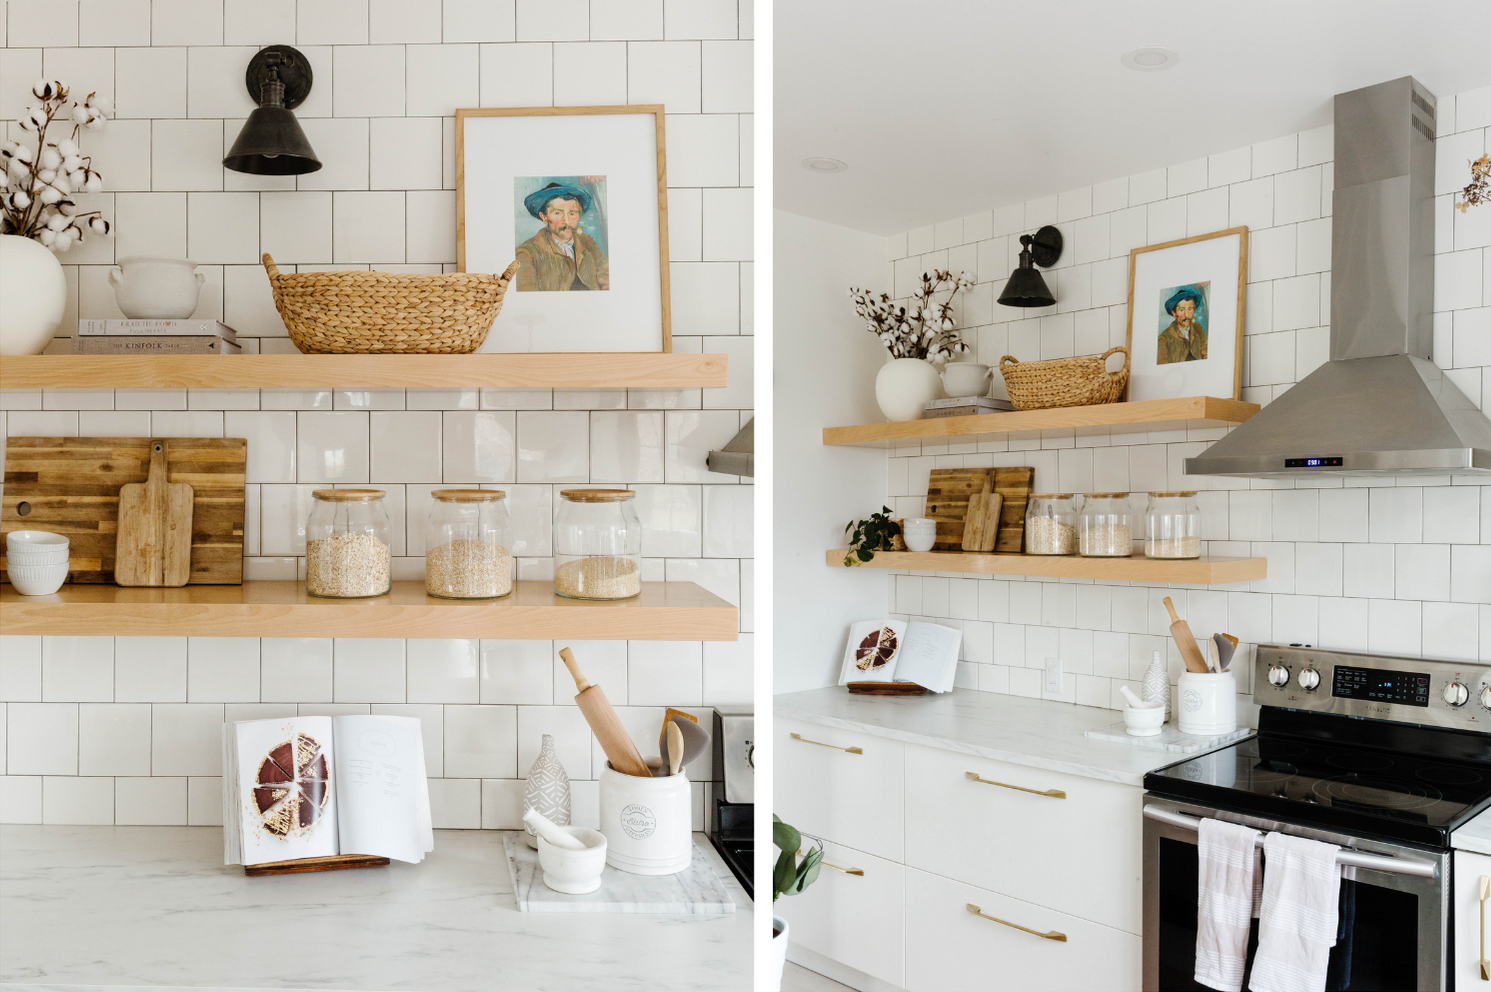 Two photos of Brit's kitchen, with minimally decorated shelves and nearly bare counter tops